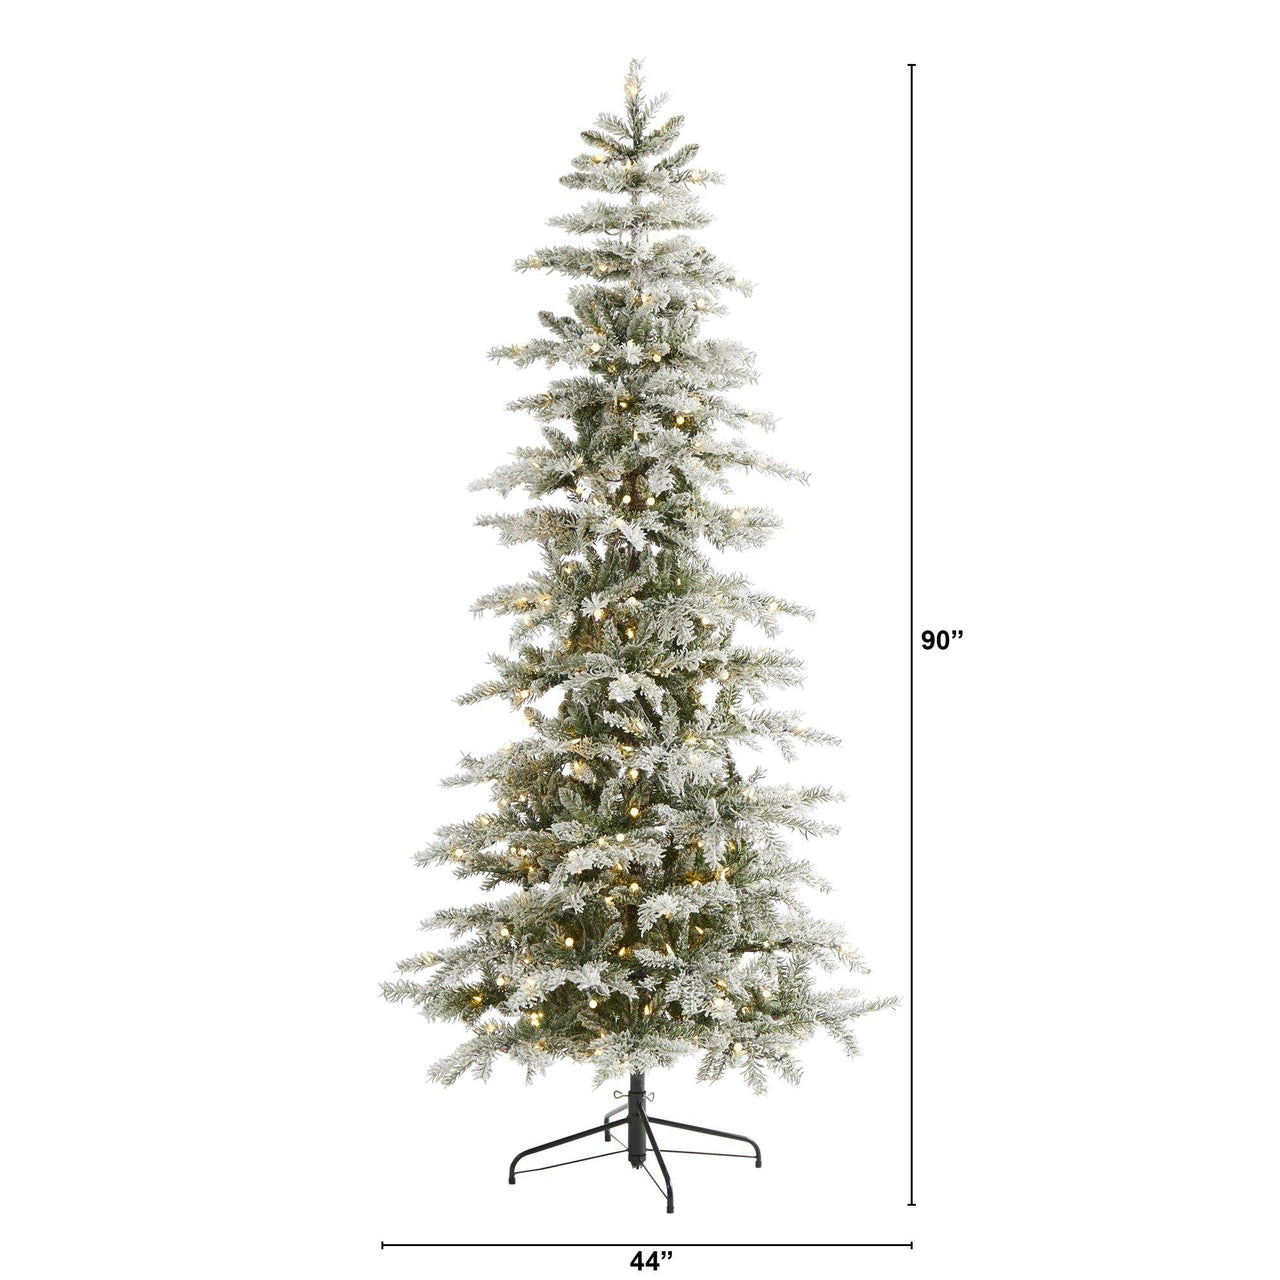 7.5’ Slim Flocked Nova Scotia Spruce Artificial Christmas Tree with 450 Warm White LED Lights and 909 Bendable Branches - The Fox Decor